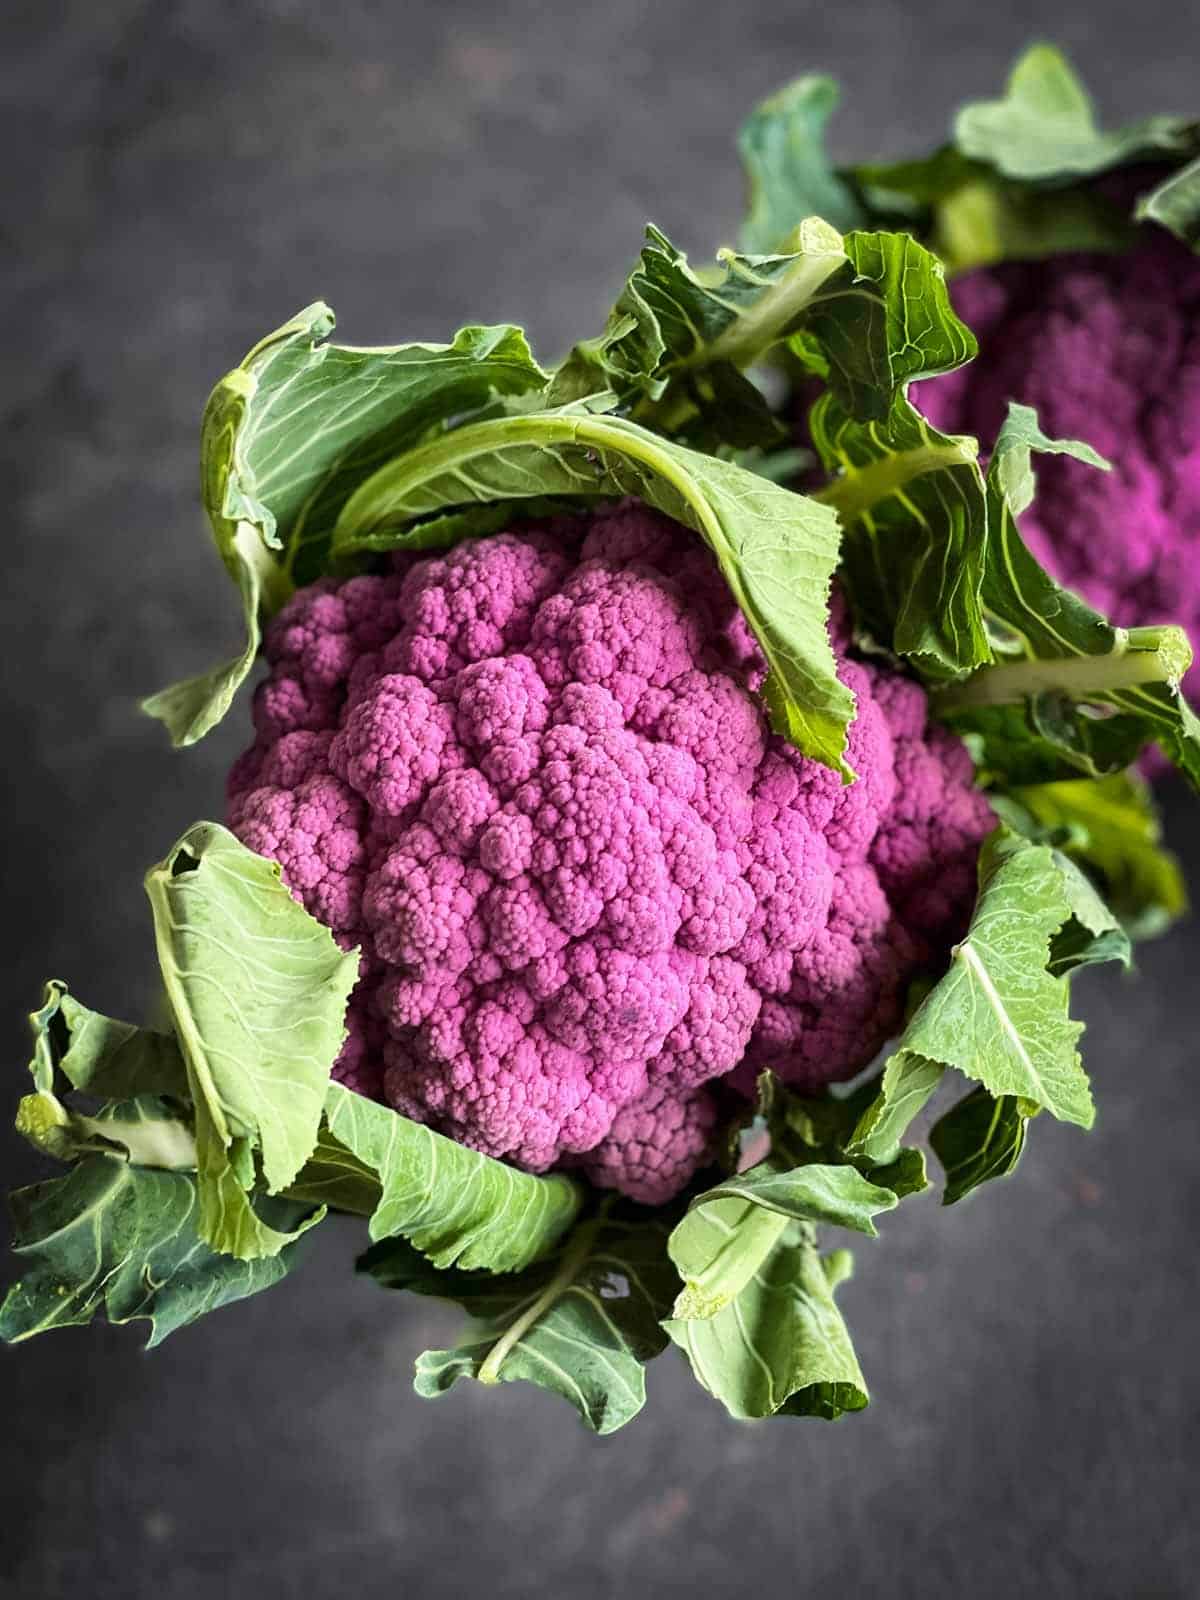 Whole purple cauliflower with green leaves